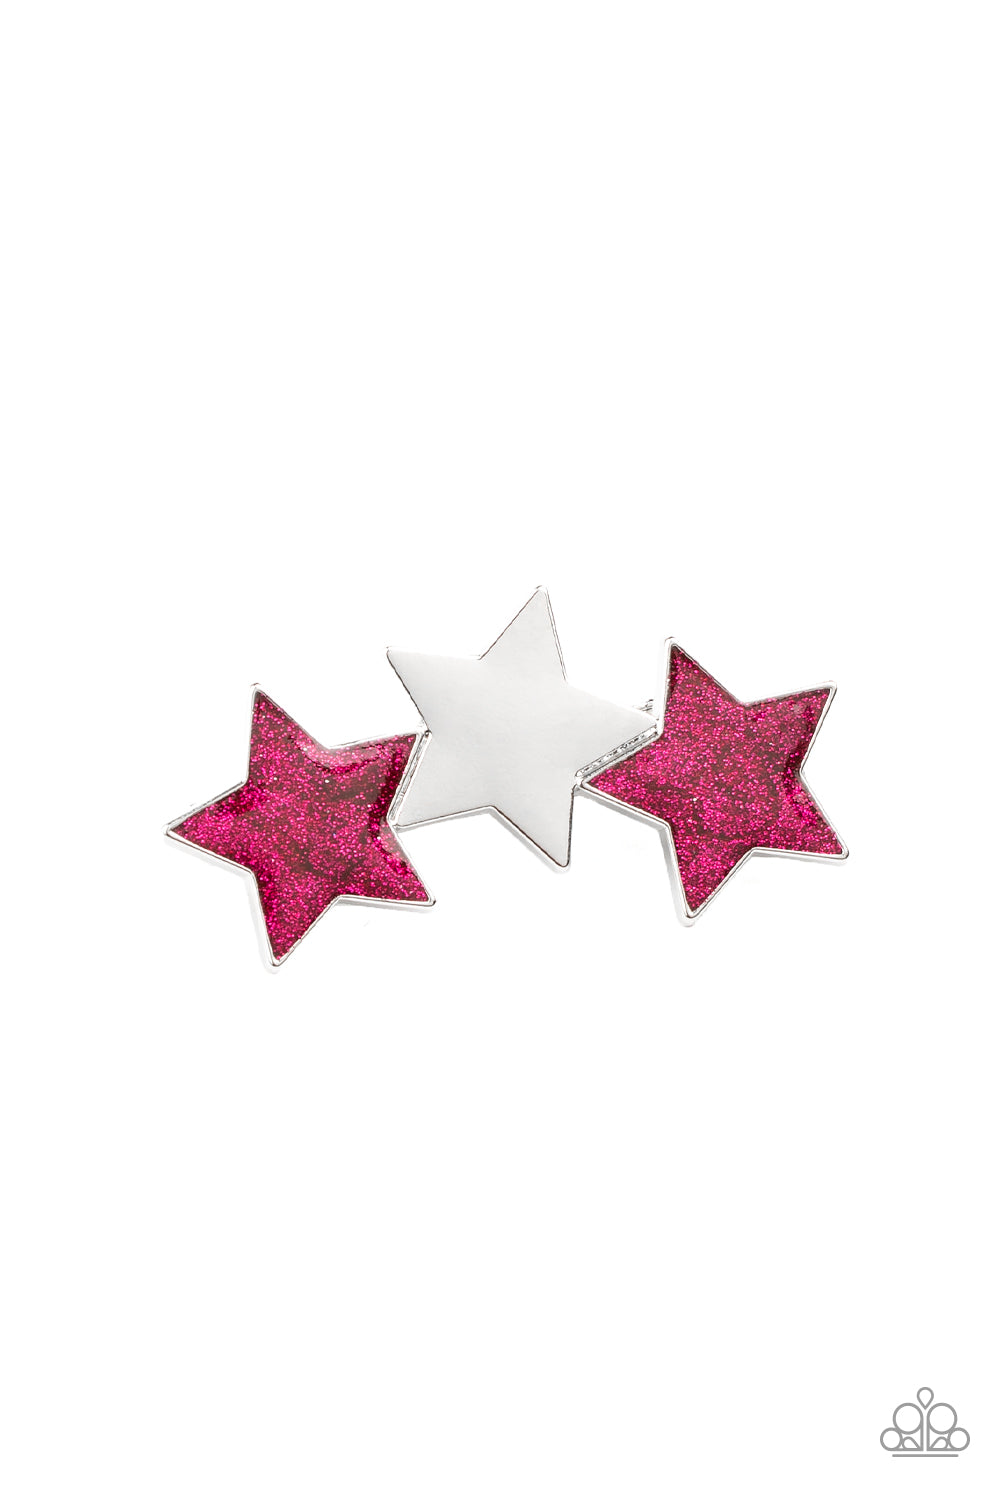 Don't Get Me STAR-ted - pink - Paparazzi hair clip